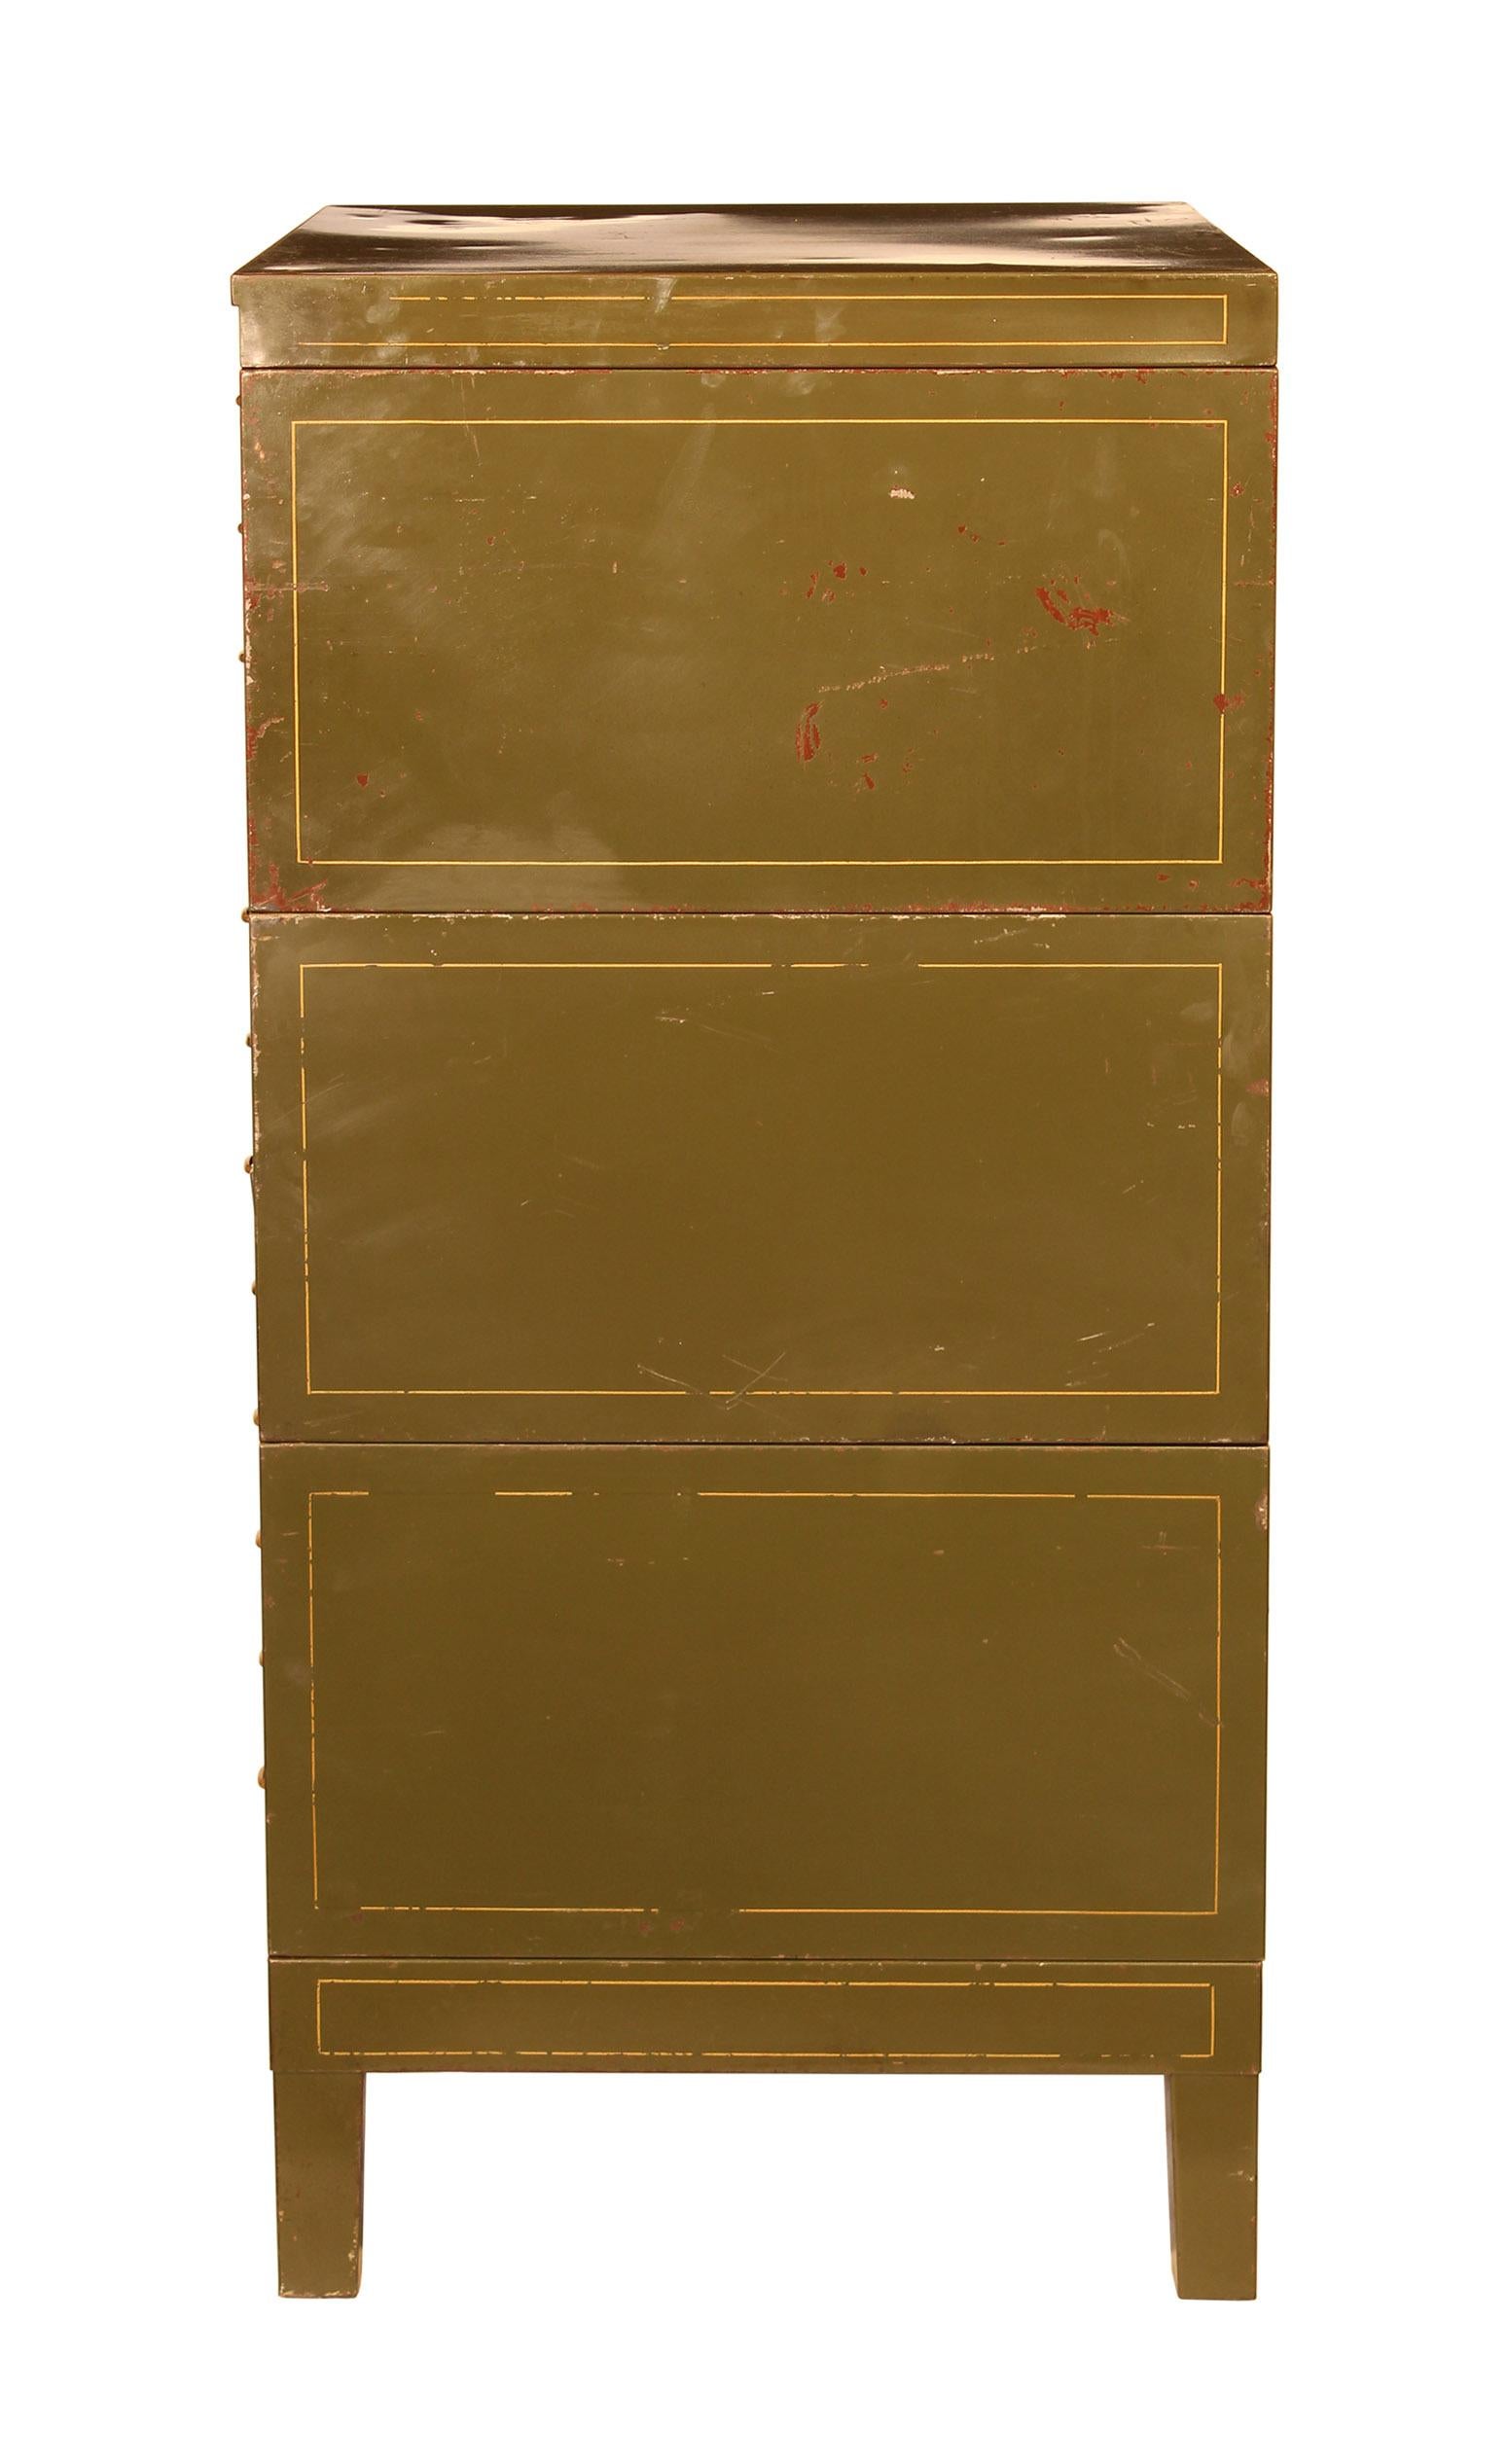 Industrial Vintage Army Green Steel Flat File Map and Blueprint Cabinet by Globe Wernicke